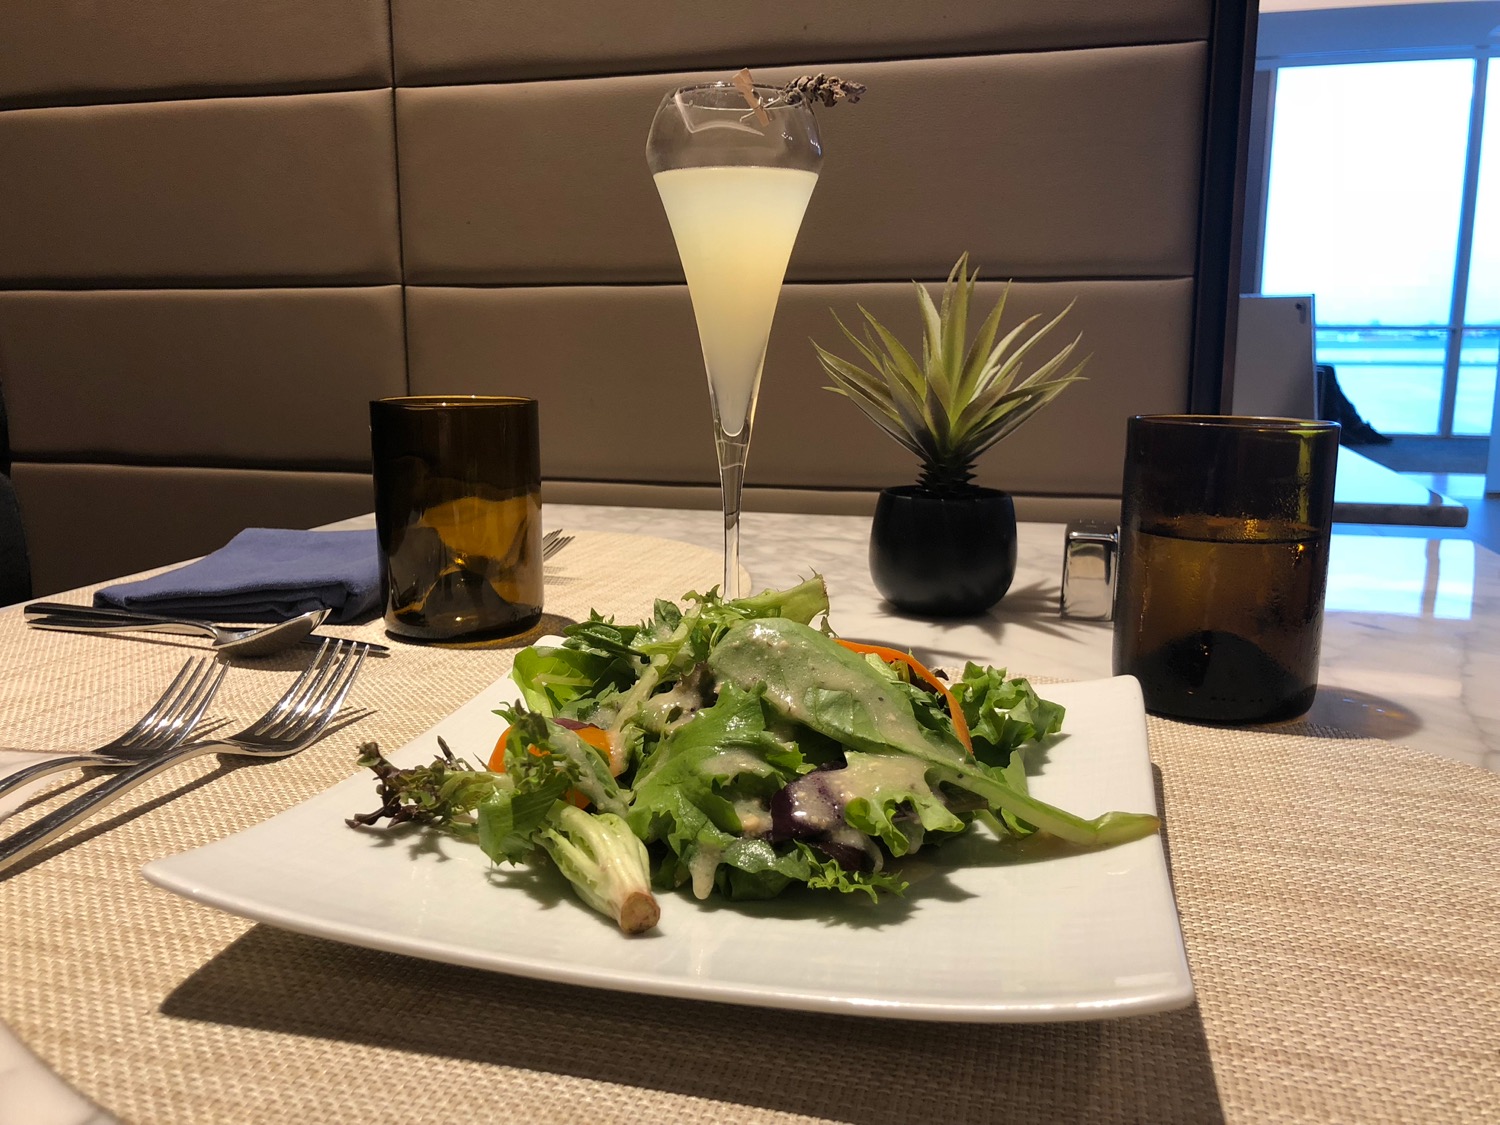 a plate of salad and a glass of liquid on a table